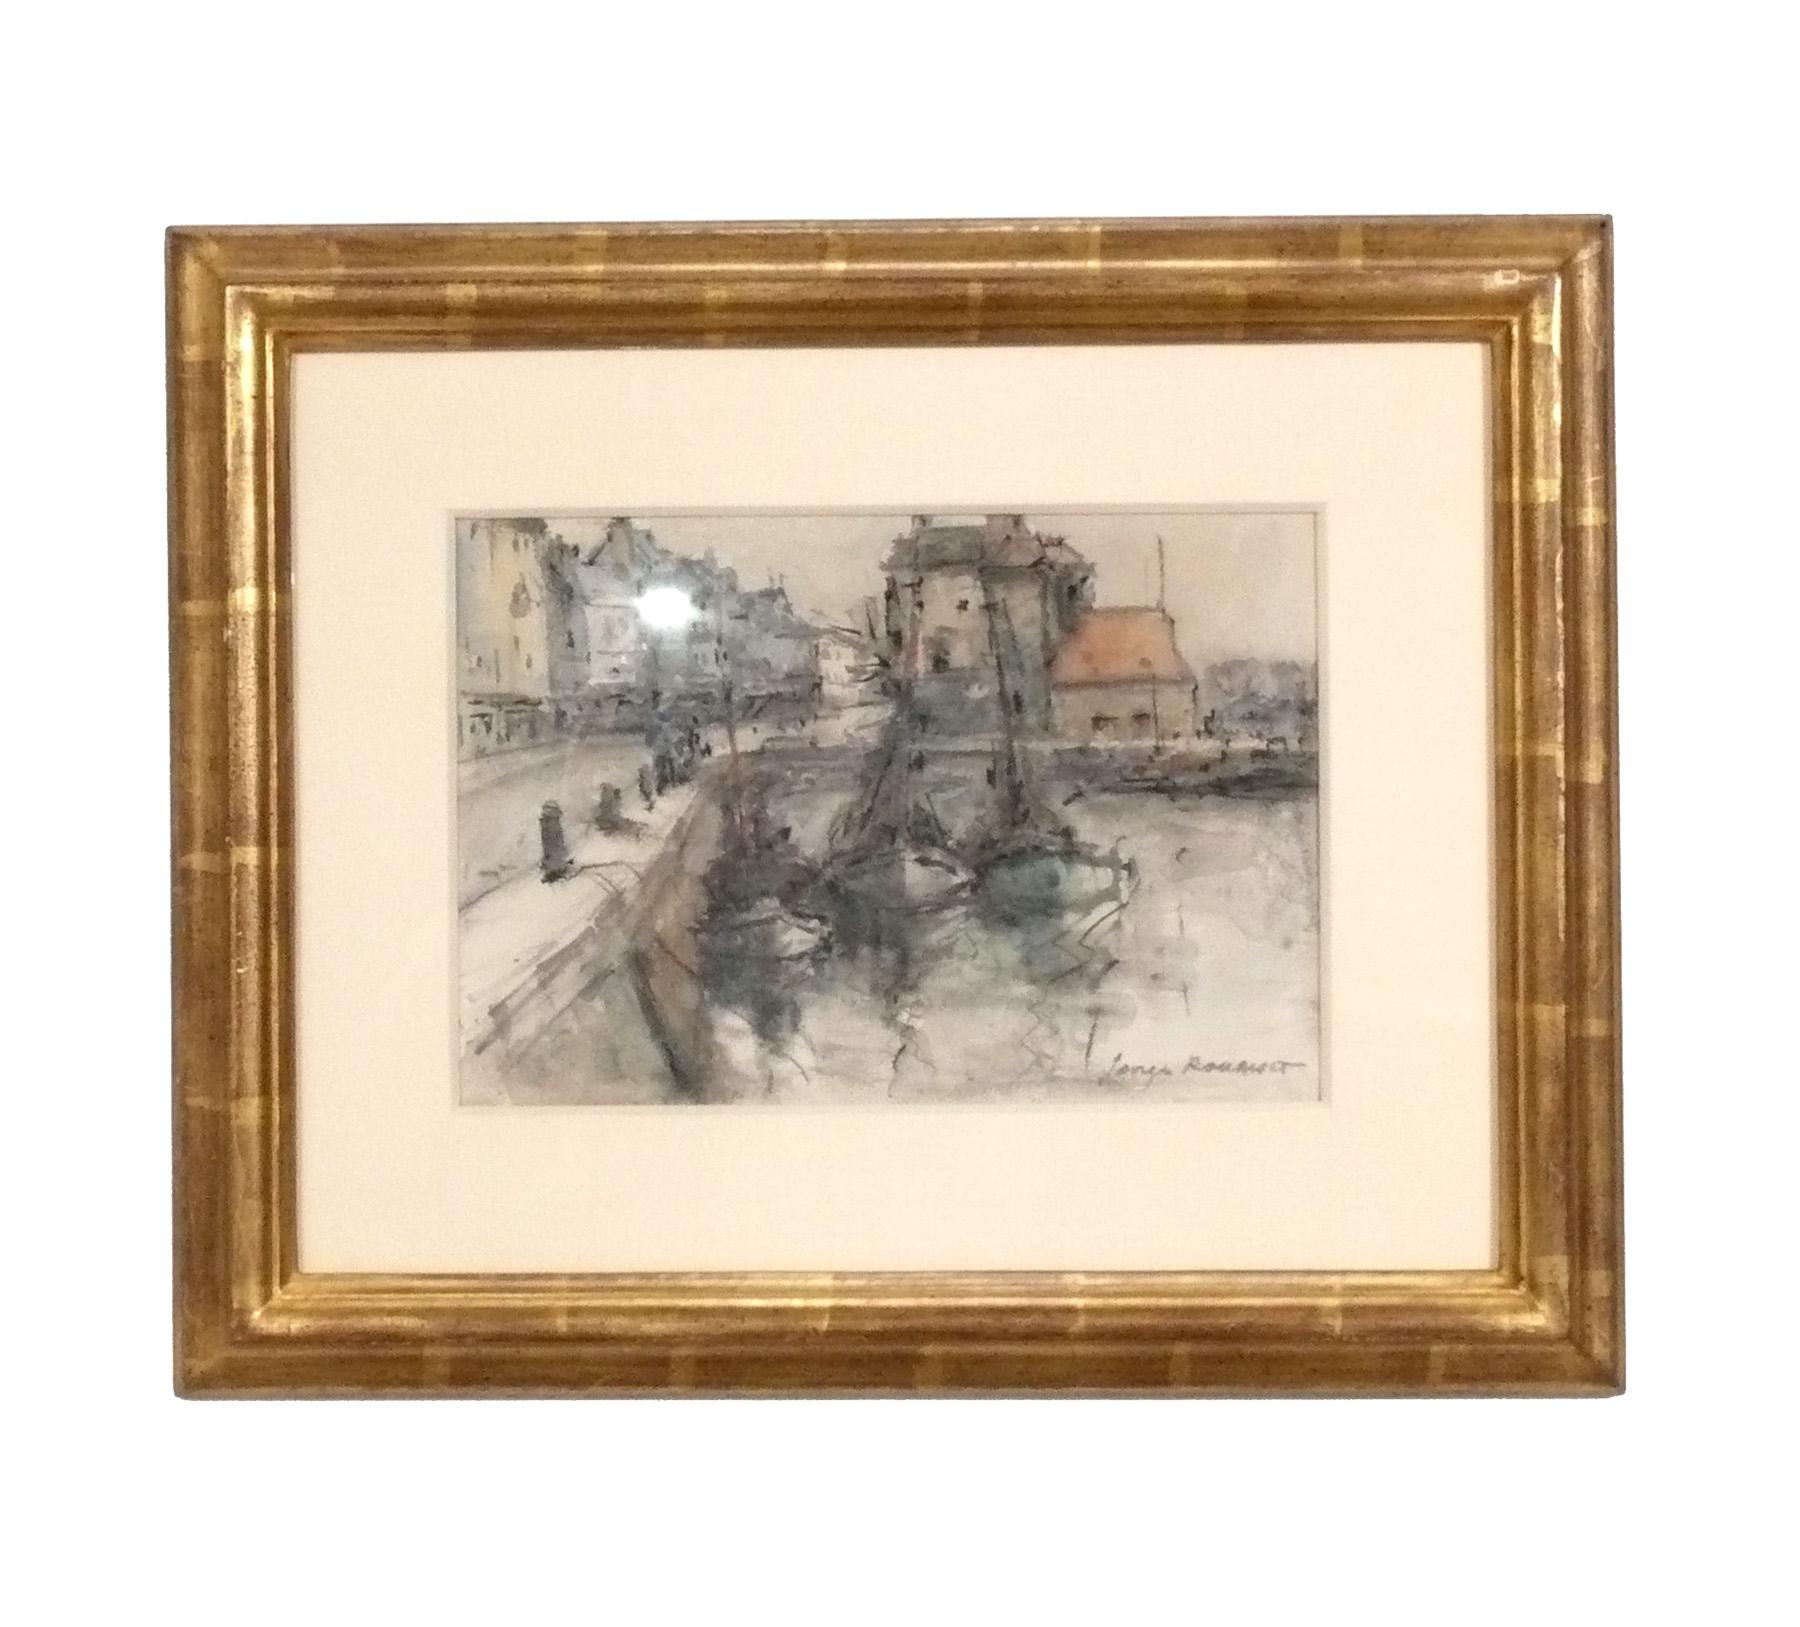 Set of four George Rouault landscape watercolor paintings, recently framed in 22 karat gold leaf wood frames by Lowy Framers, NYC. The paintings are French, circa 1960s. They are priced at $800 each, or $2800 for the set of four. Clockwise from top